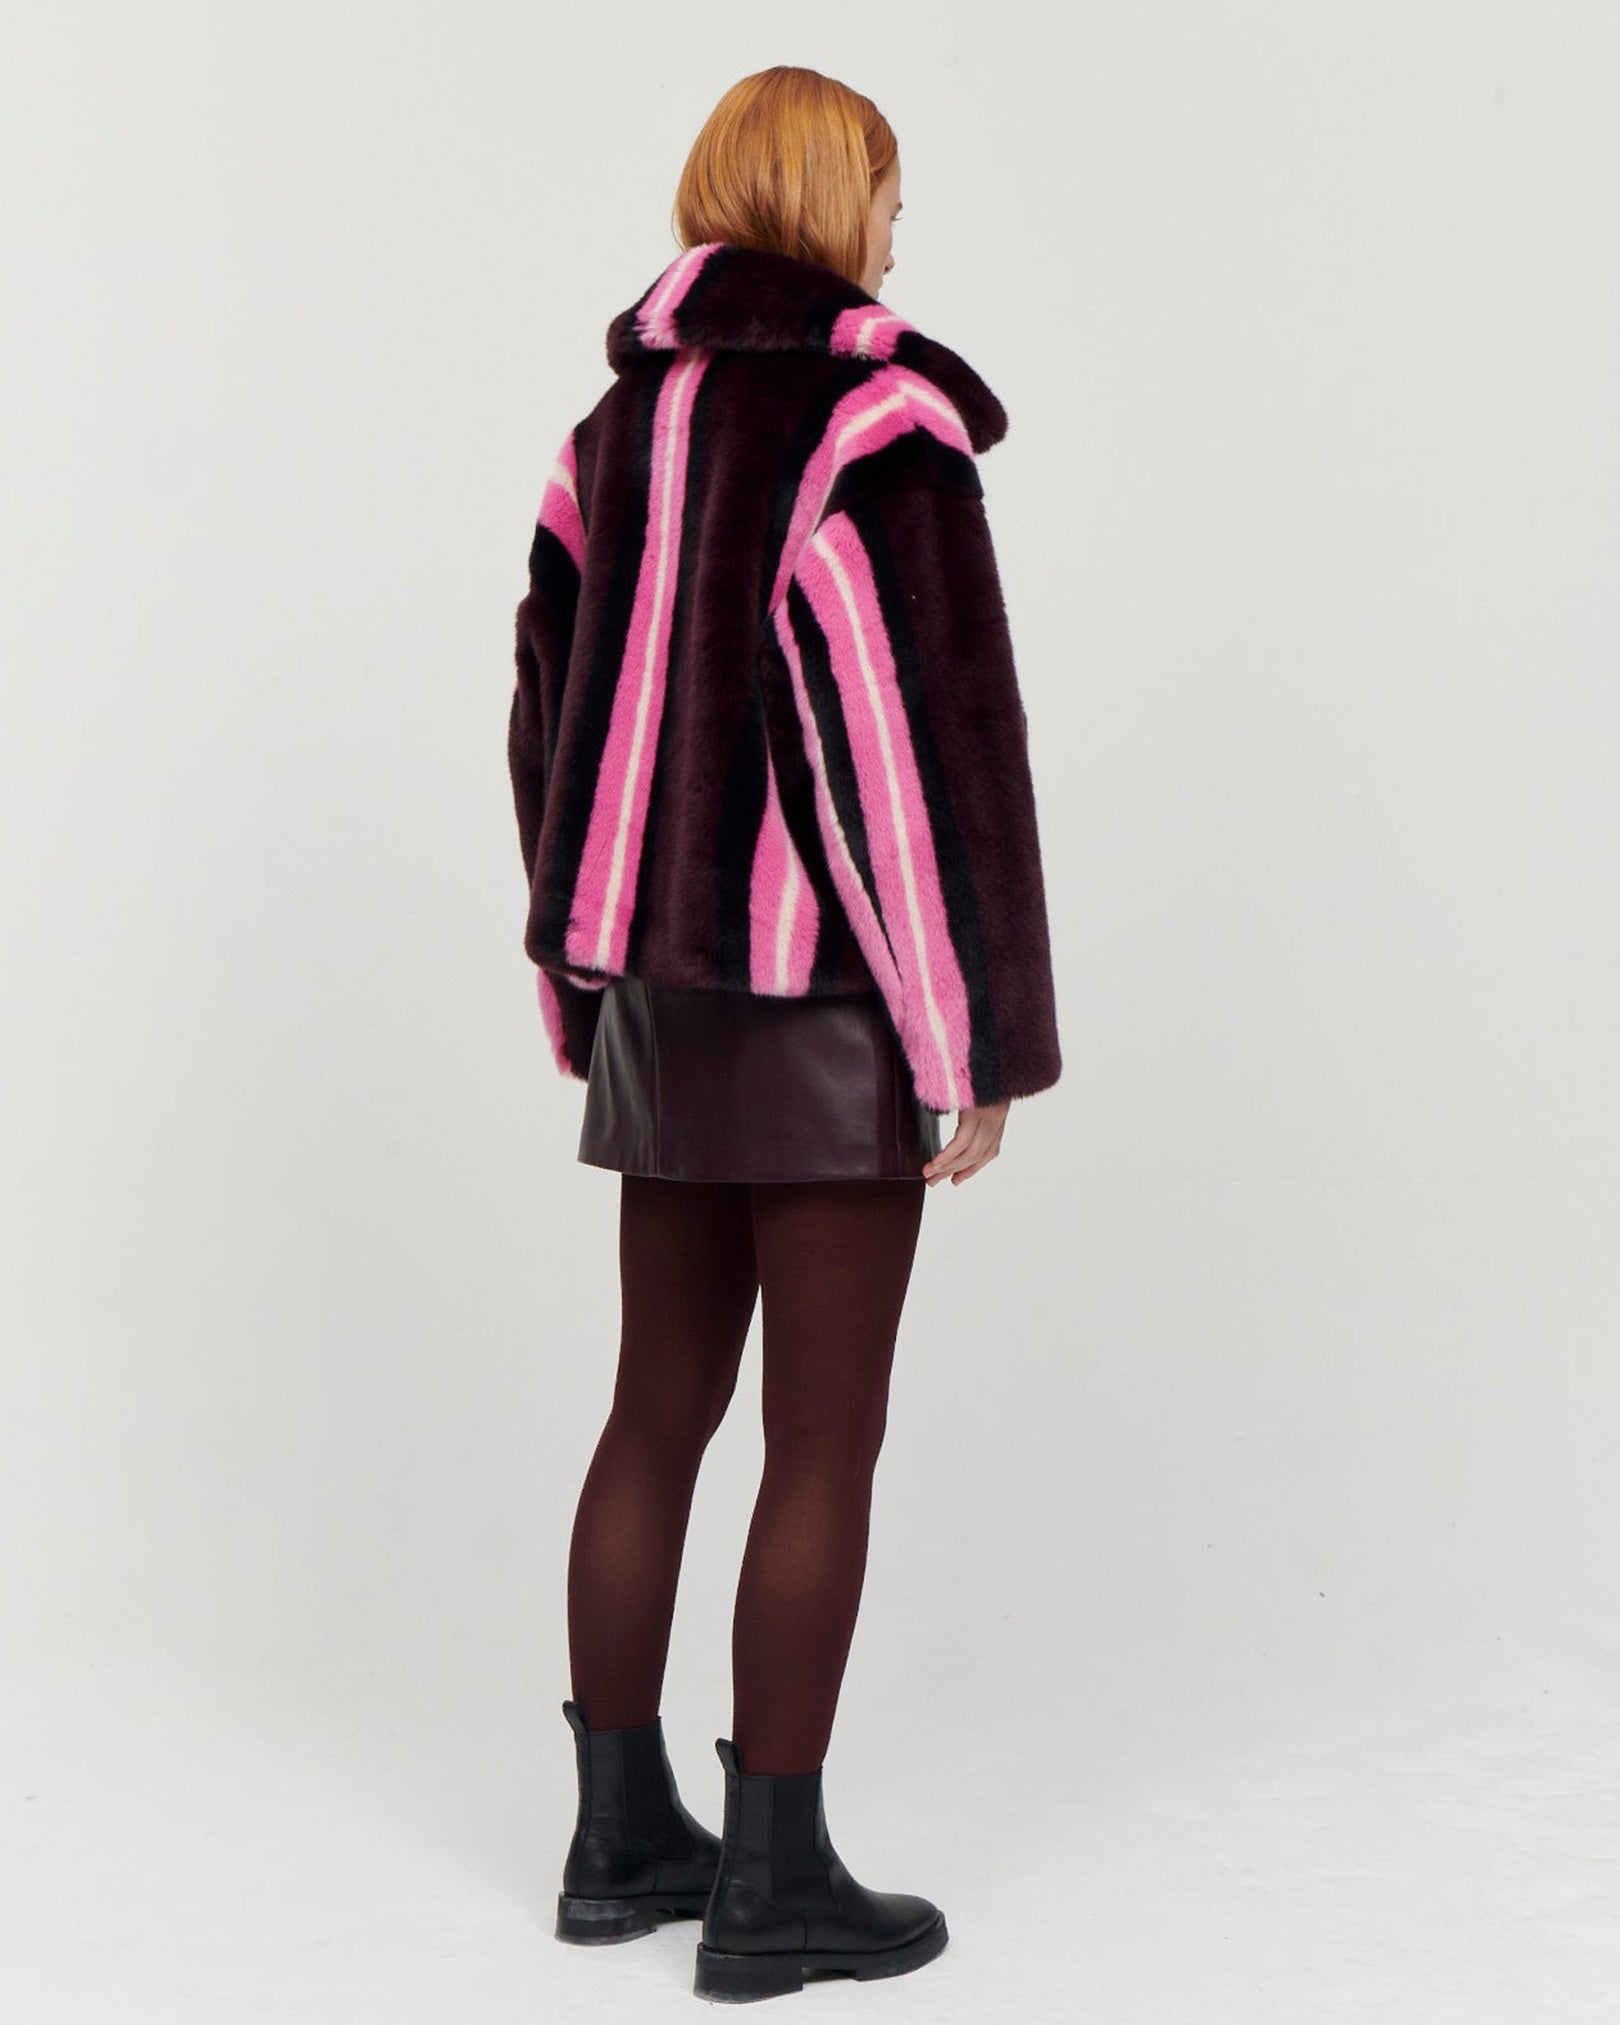 JAKKE Traci Cropped Faux Fur Jacket in Burgundy Stripe available at Lahn.shop